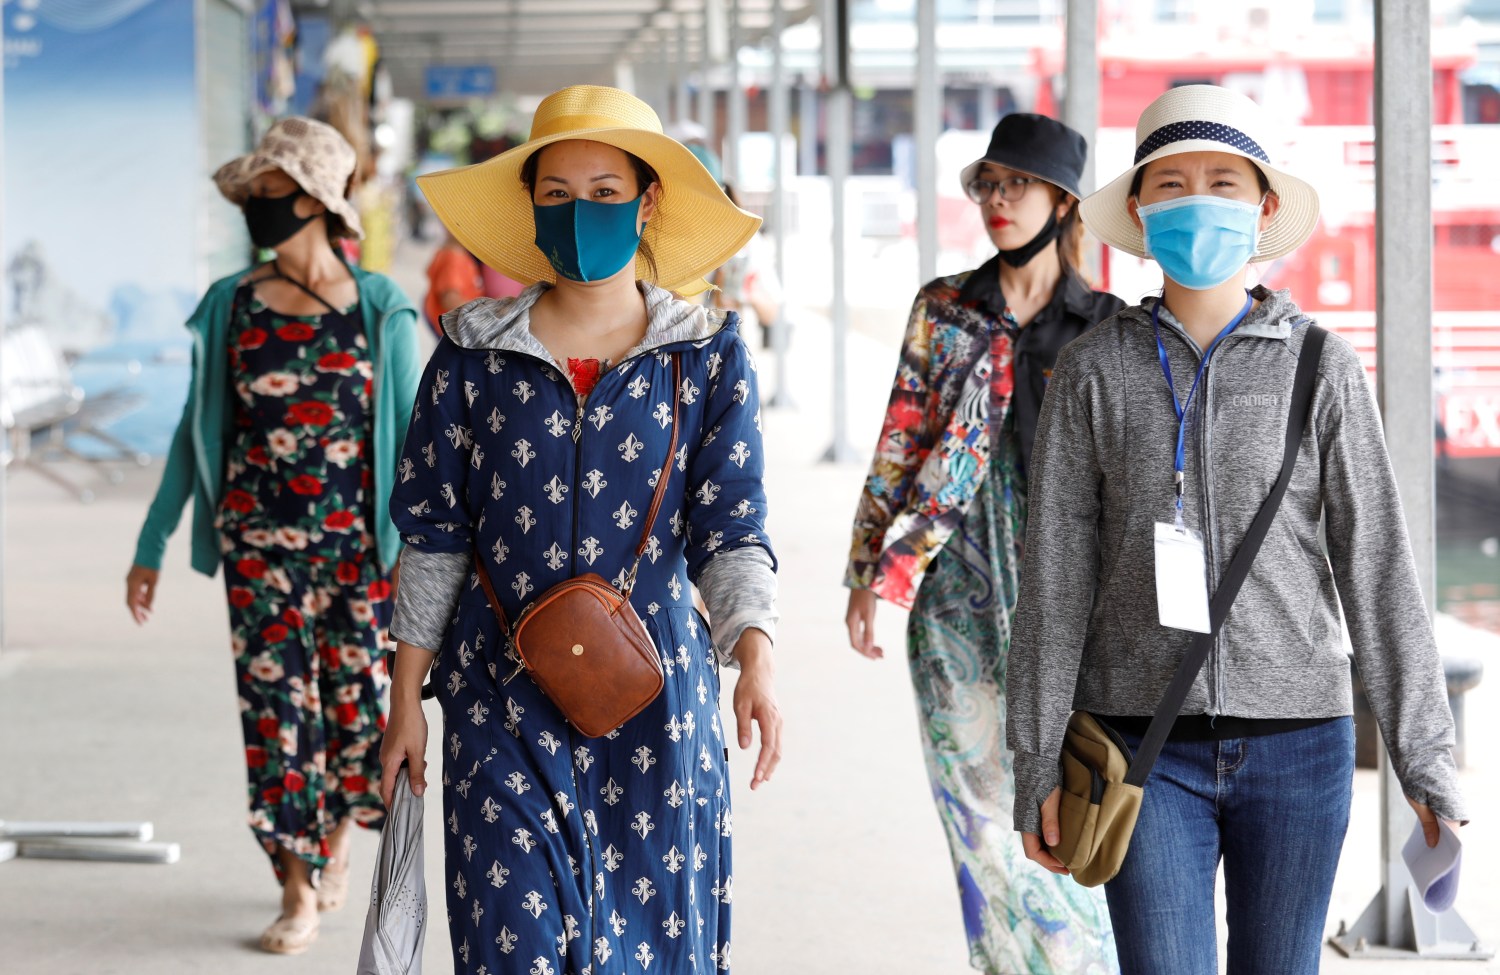 Vietnamese tourists visit Ha Long bay after the Vietnamese government eased the lockdown following the coronavirus disease (COVID-19) outbreak, in Quang Ninh province, Vietnam May 19, 2020. REUTERS/Kham